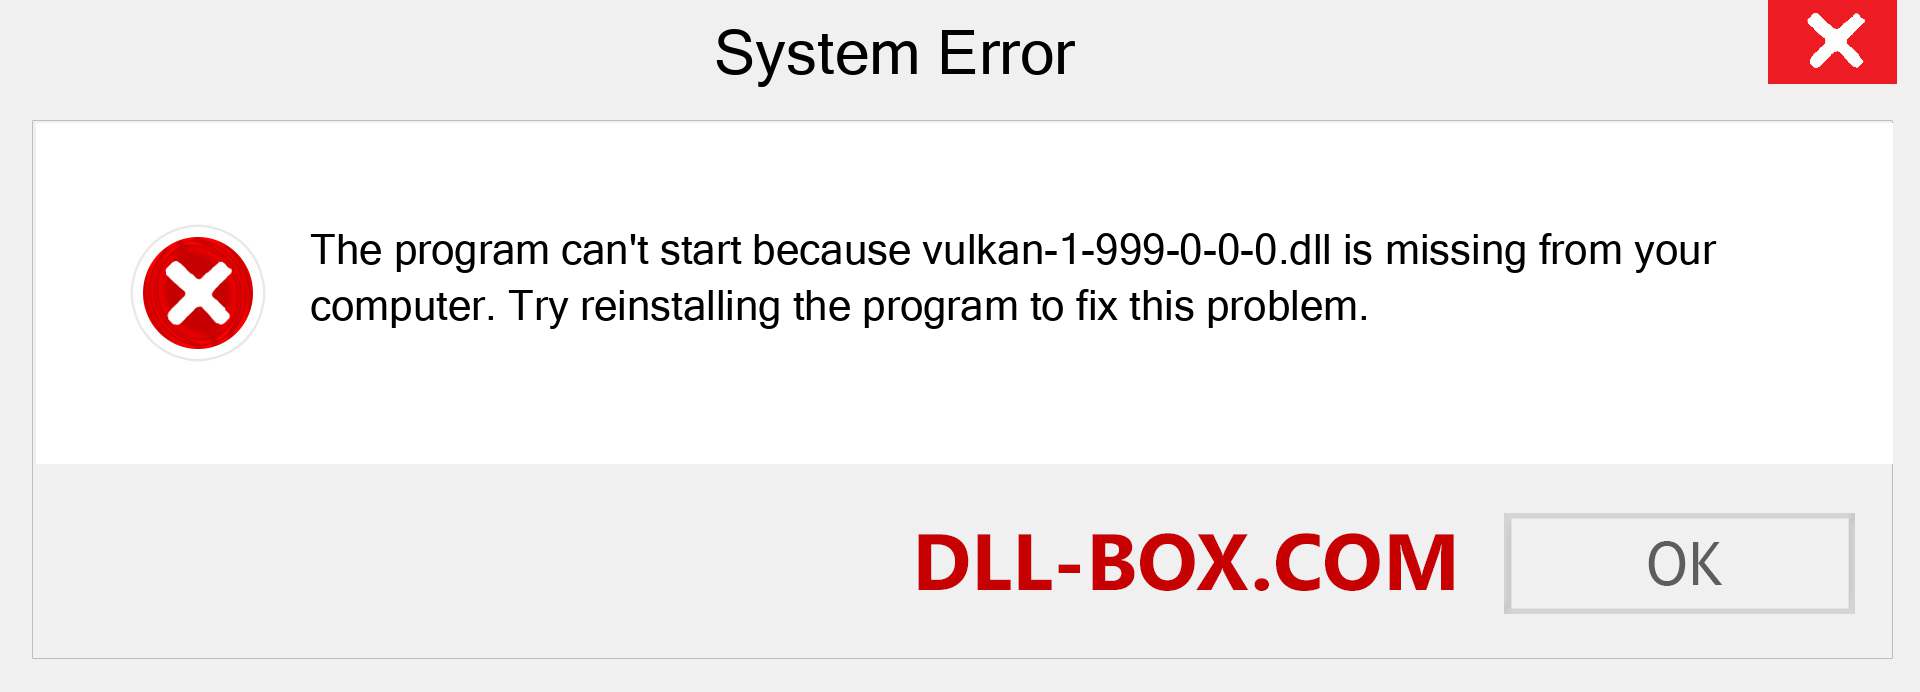  vulkan-1-999-0-0-0.dll file is missing?. Download for Windows 7, 8, 10 - Fix  vulkan-1-999-0-0-0 dll Missing Error on Windows, photos, images